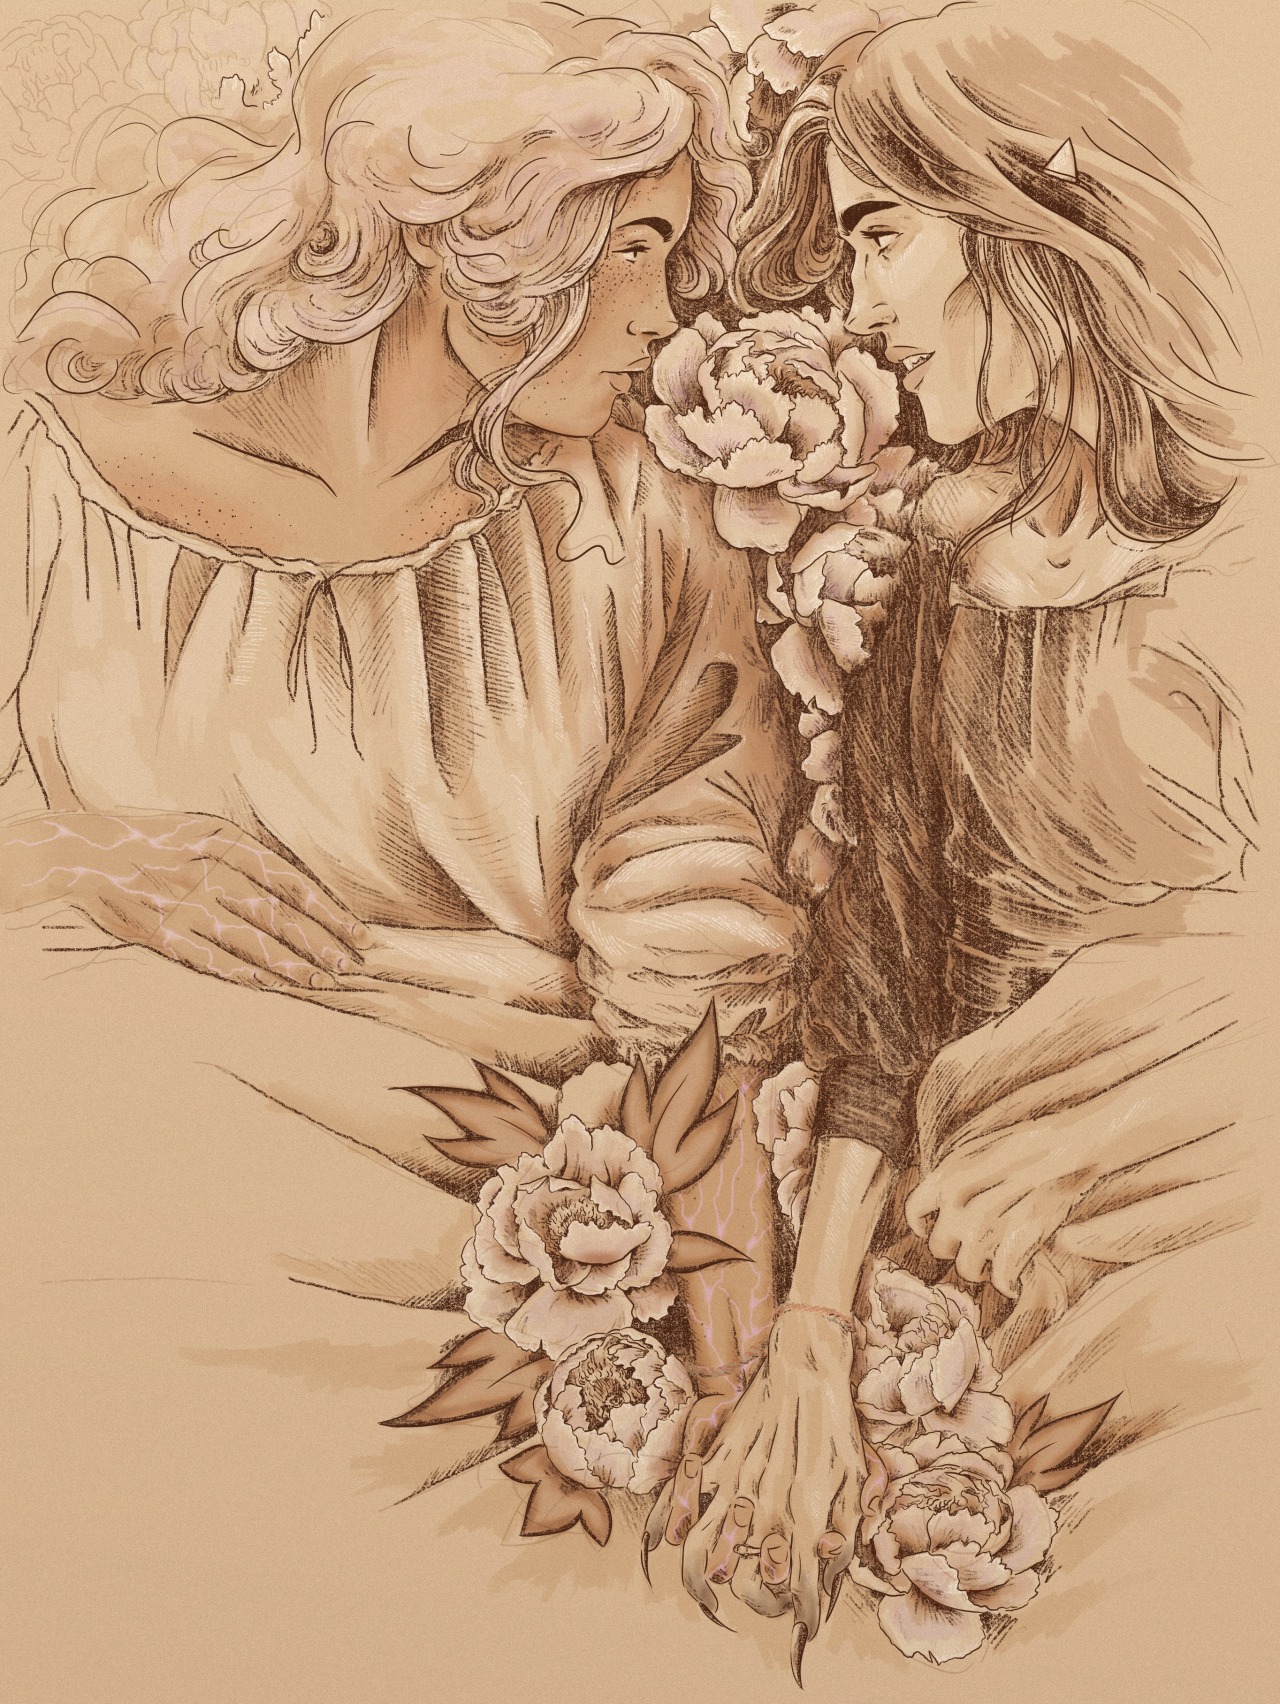 Fanart done an old-illustration style (cream and tan tones) depicting Imogen and Laudna holding hands surrounded by flowers. 